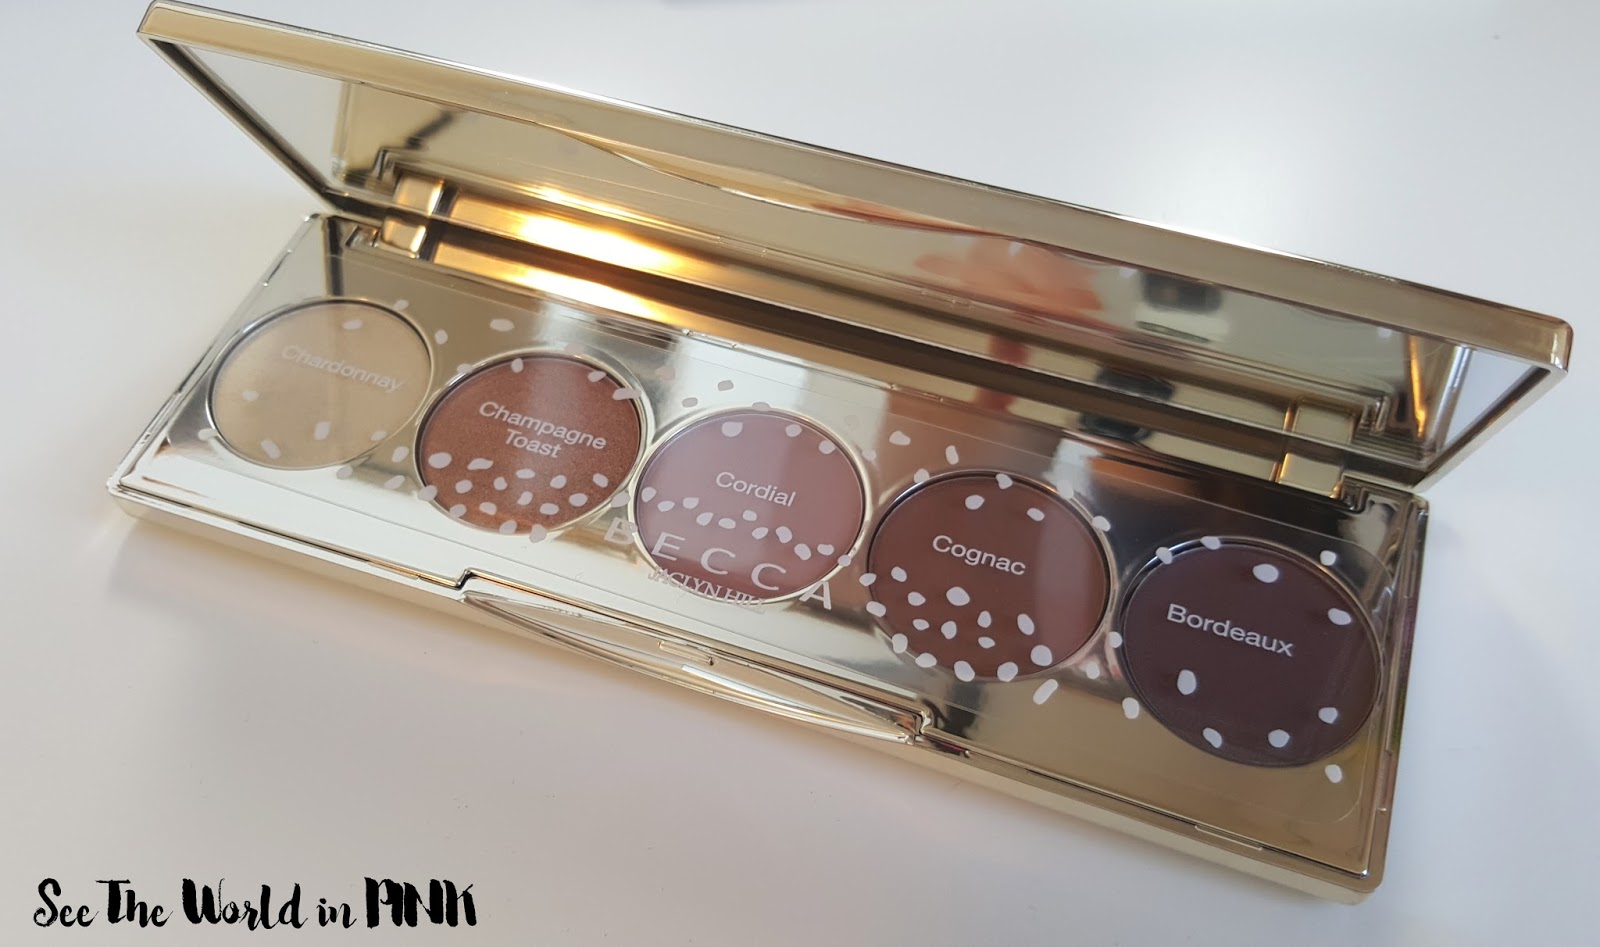 becca x jaclyn hill champagne glow collection eyeshadow palette review